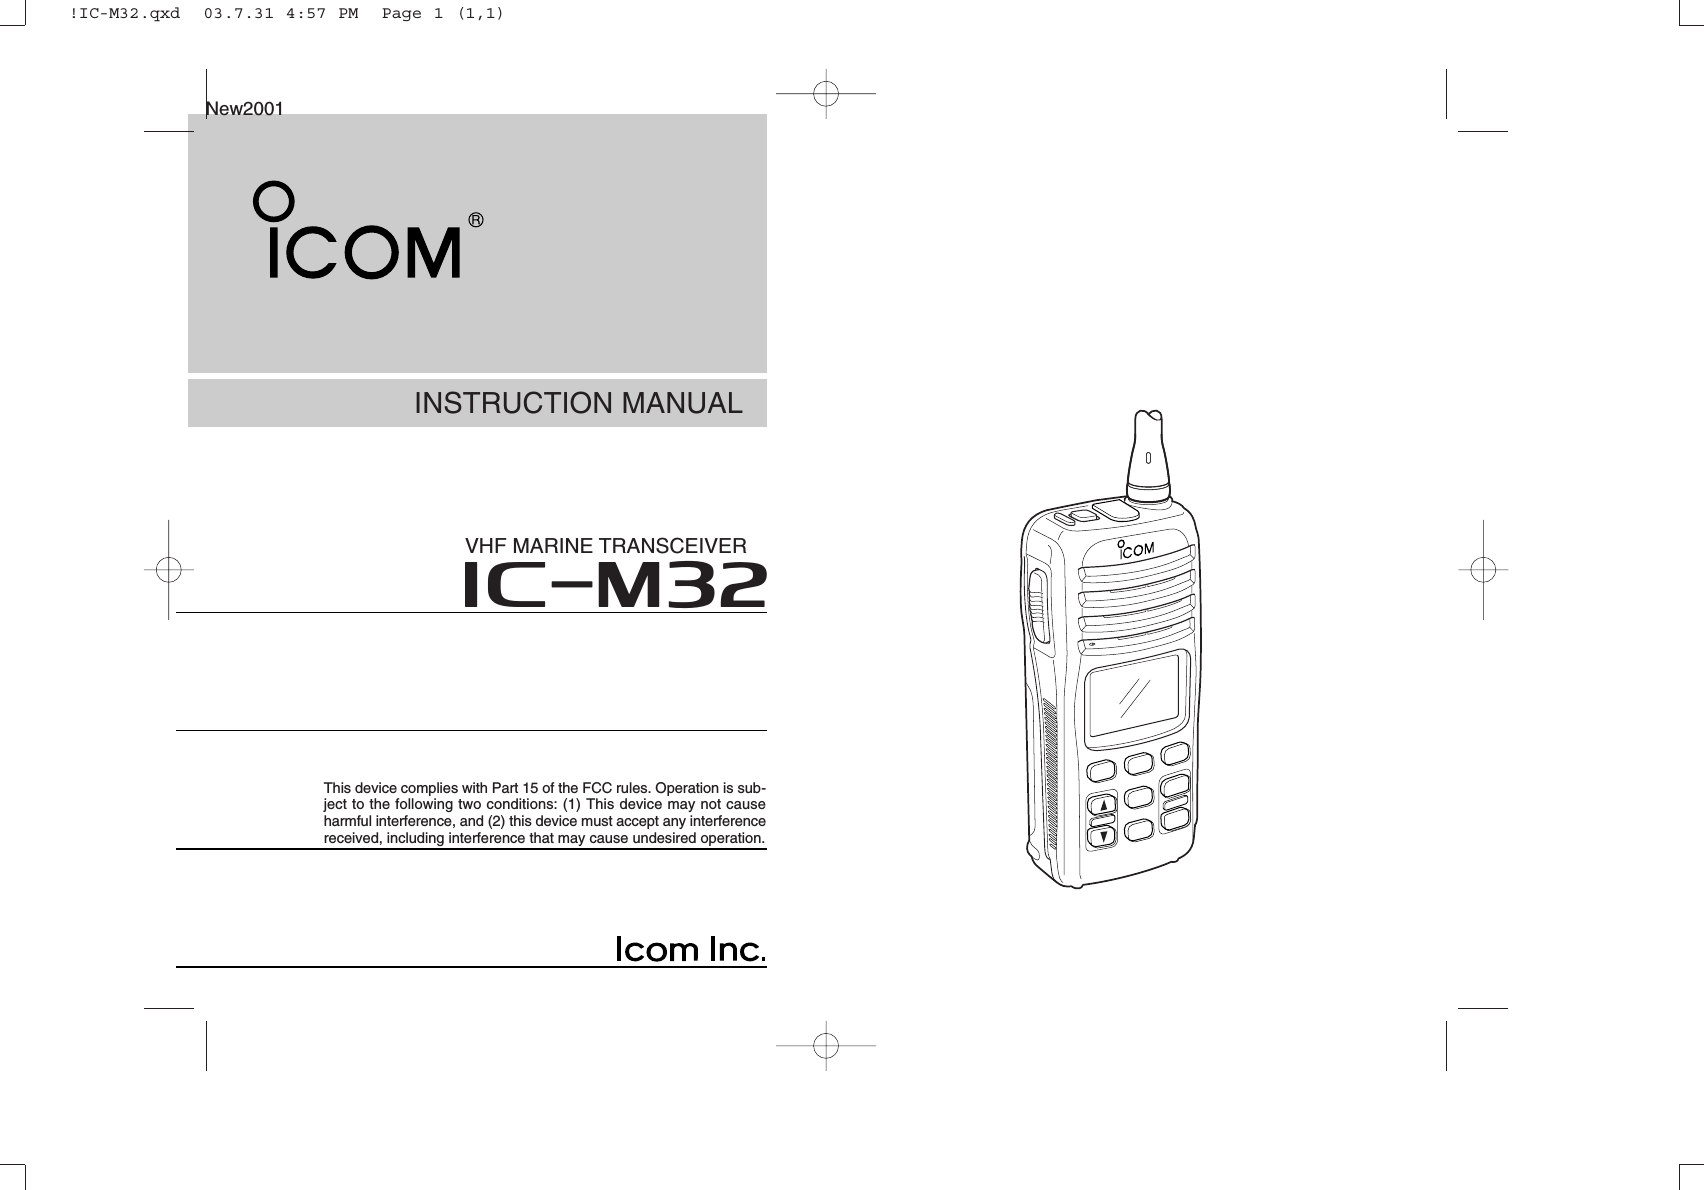 INSTRUCTION MANUALiM32VHF MARINE TRANSCEIVERThis device complies with Part 15 of the FCC rules. Operation is sub-ject to the following two conditions: (1) This device may not causeharmful interference, and (2) this device must accept any interferencereceived, including interference that may cause undesired operation.New2001!IC-M32.qxd  03.7.31 4:57 PM  Page 1 (1,1)